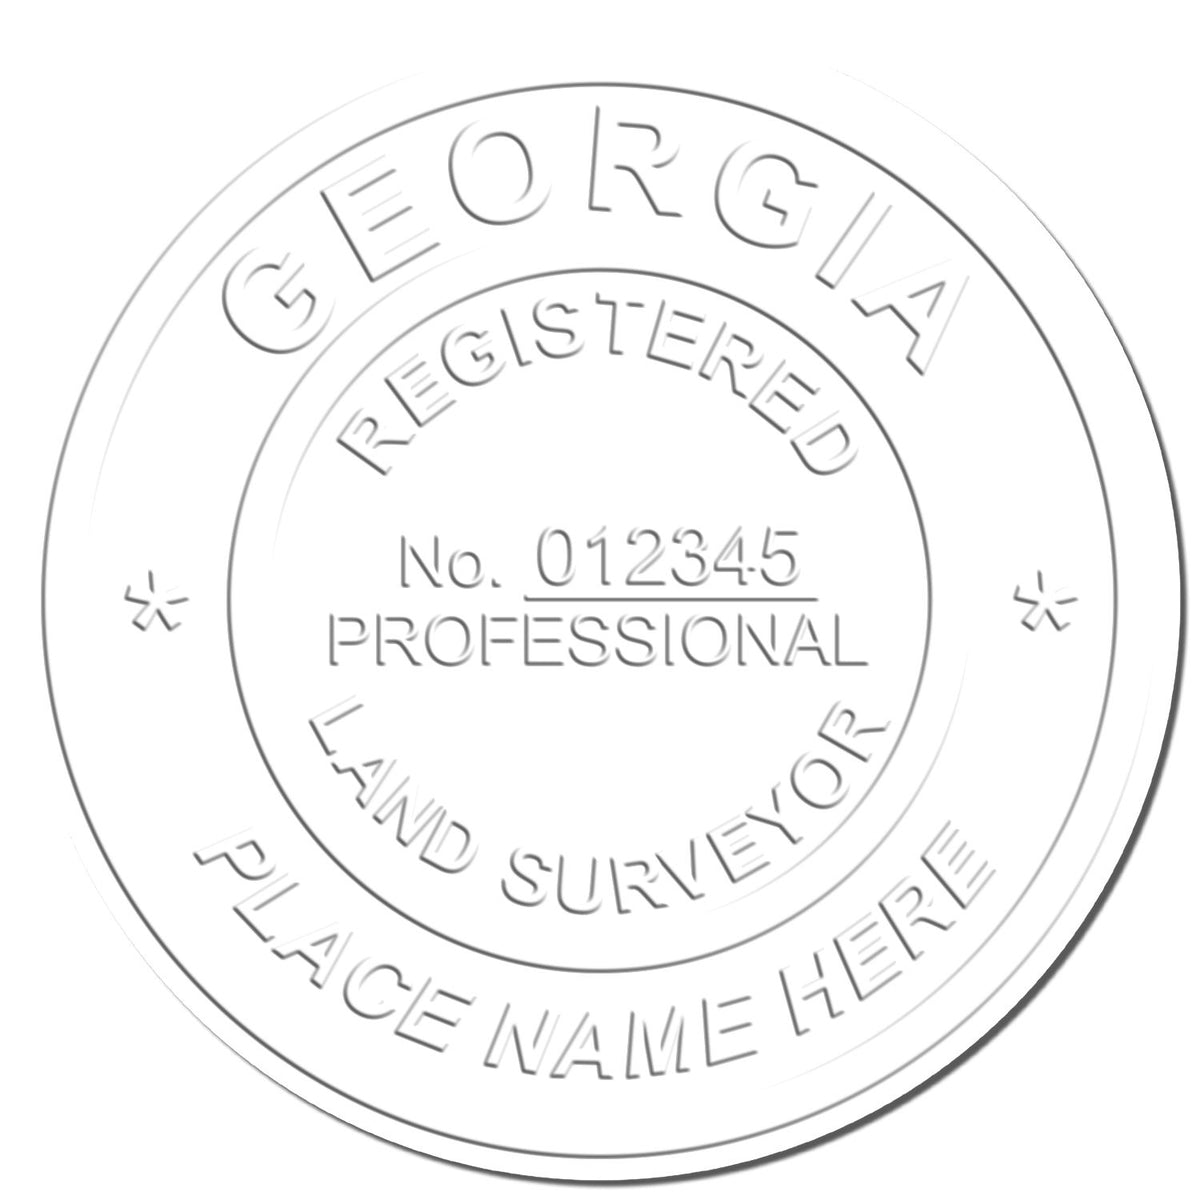 This paper is stamped with a sample imprint of the Handheld Georgia Land Surveyor Seal, signifying its quality and reliability.